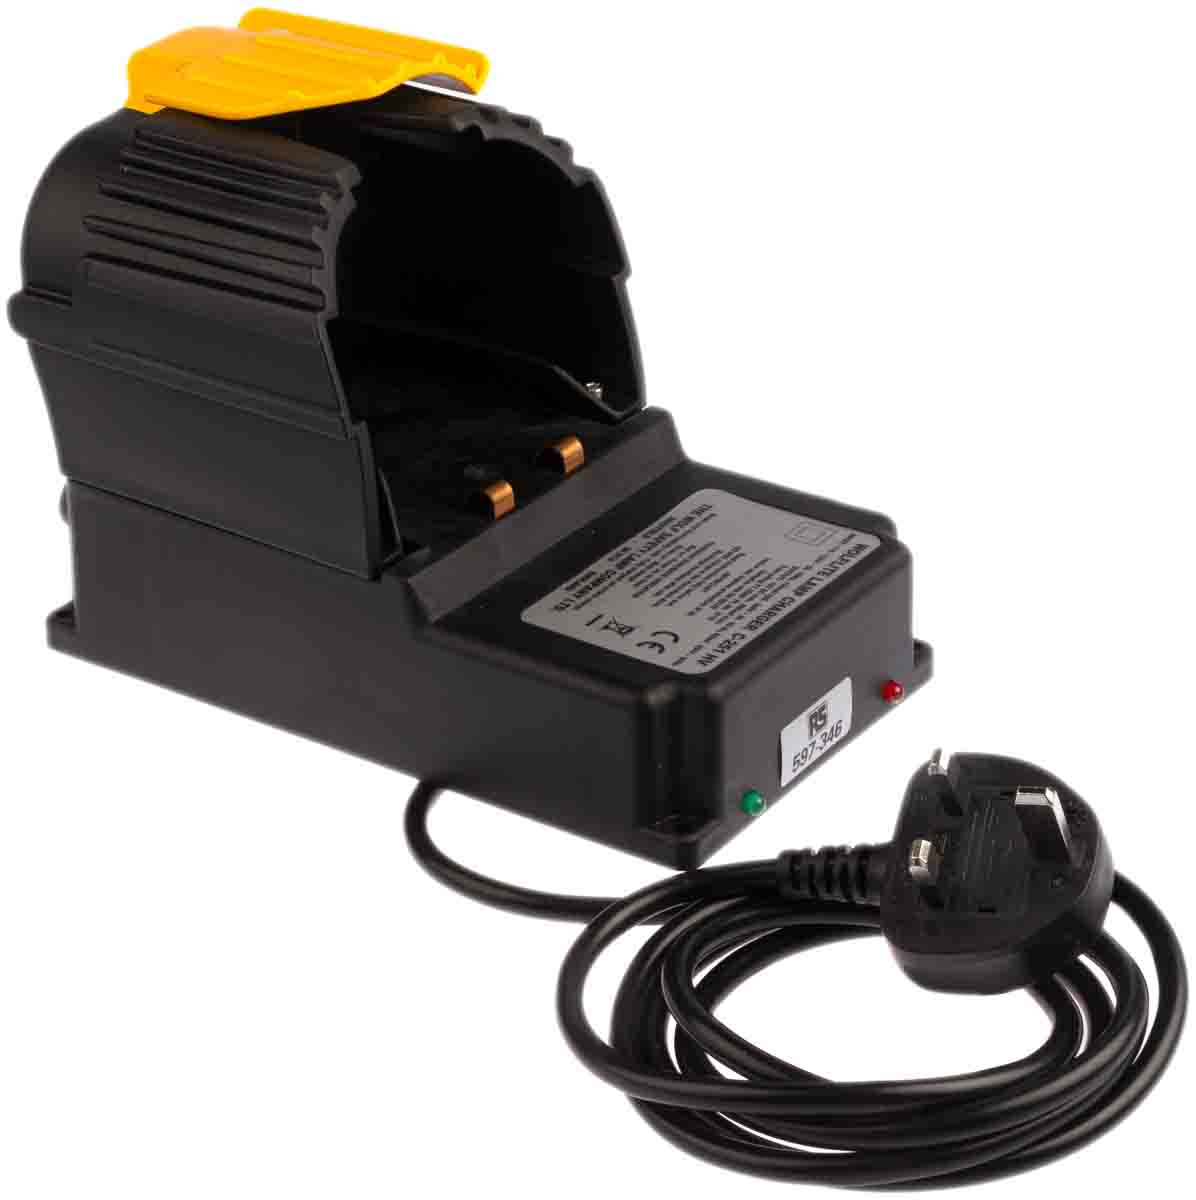 120/230 V Torch Charger for use with Wolflite Rechargeable Handlamp, 110 x 190 x 125 mm, Wall Mounted